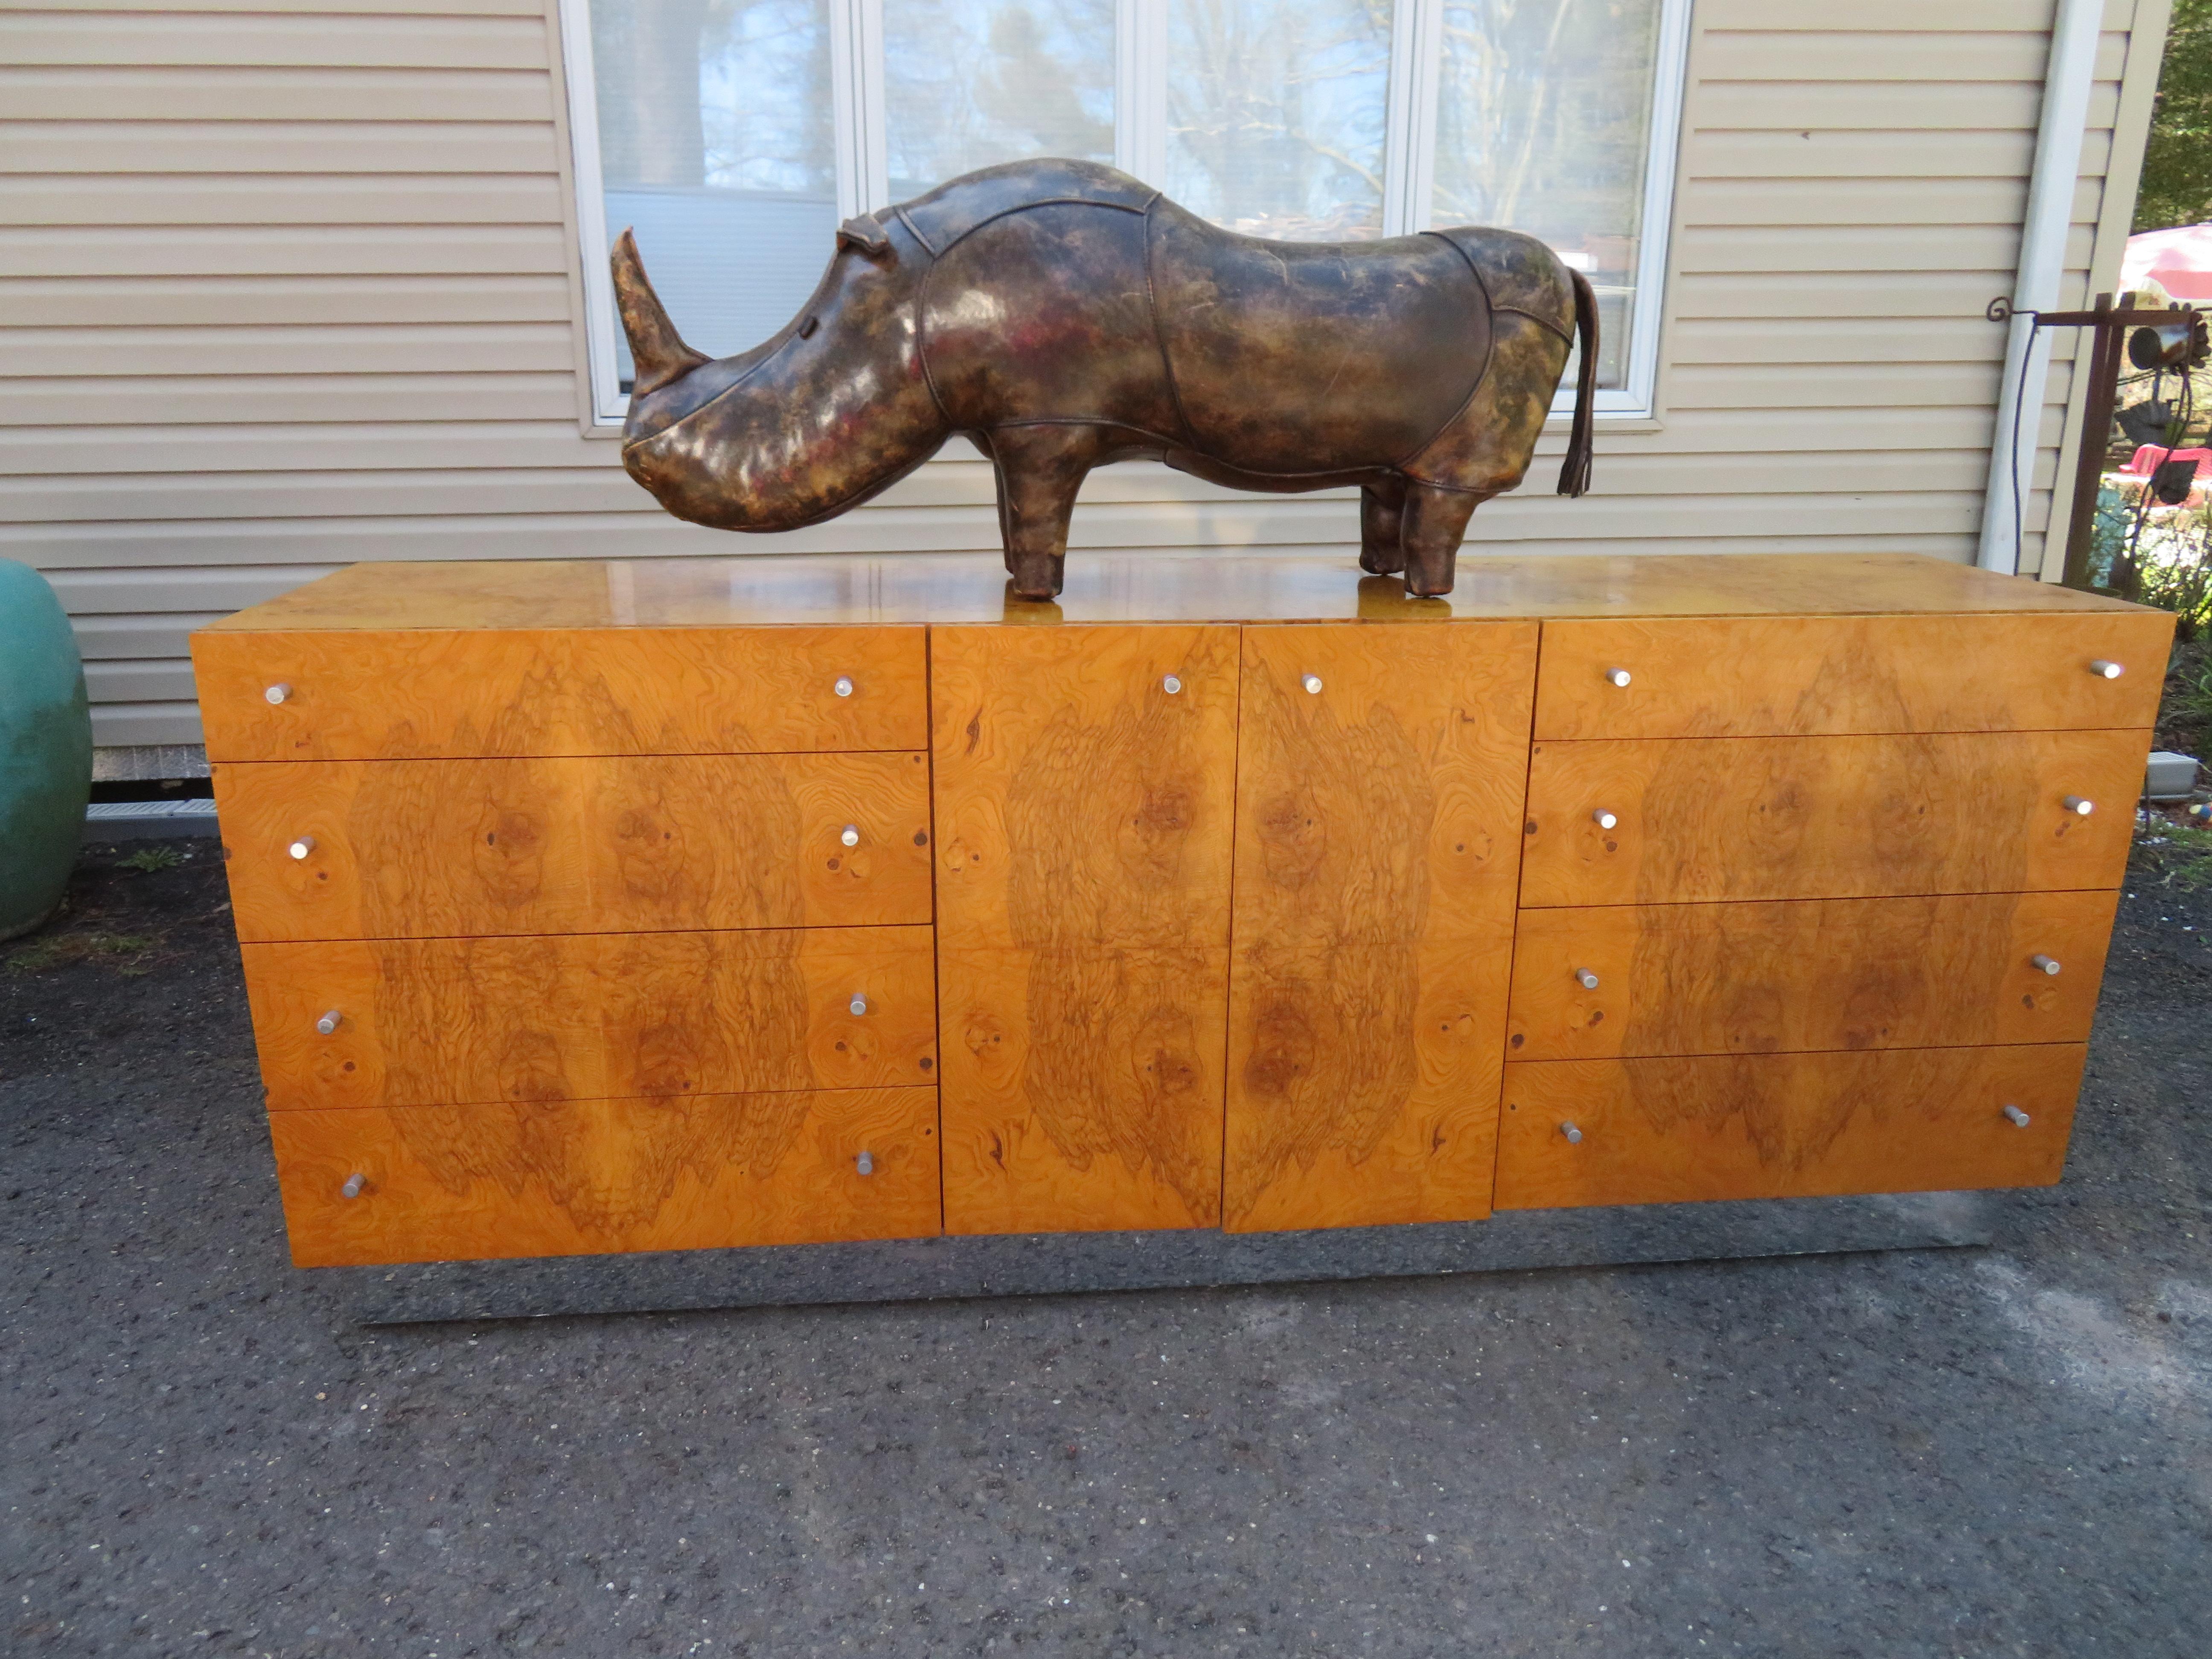 Vintage XL leather rhinoceros decorative footstool designed by Dimitri Omersa for Abercrombie and Fitch, circa 1960s is hand-stitched and features aged leather. This Charming fellow is huge-much bigger than I expected. It measures 20